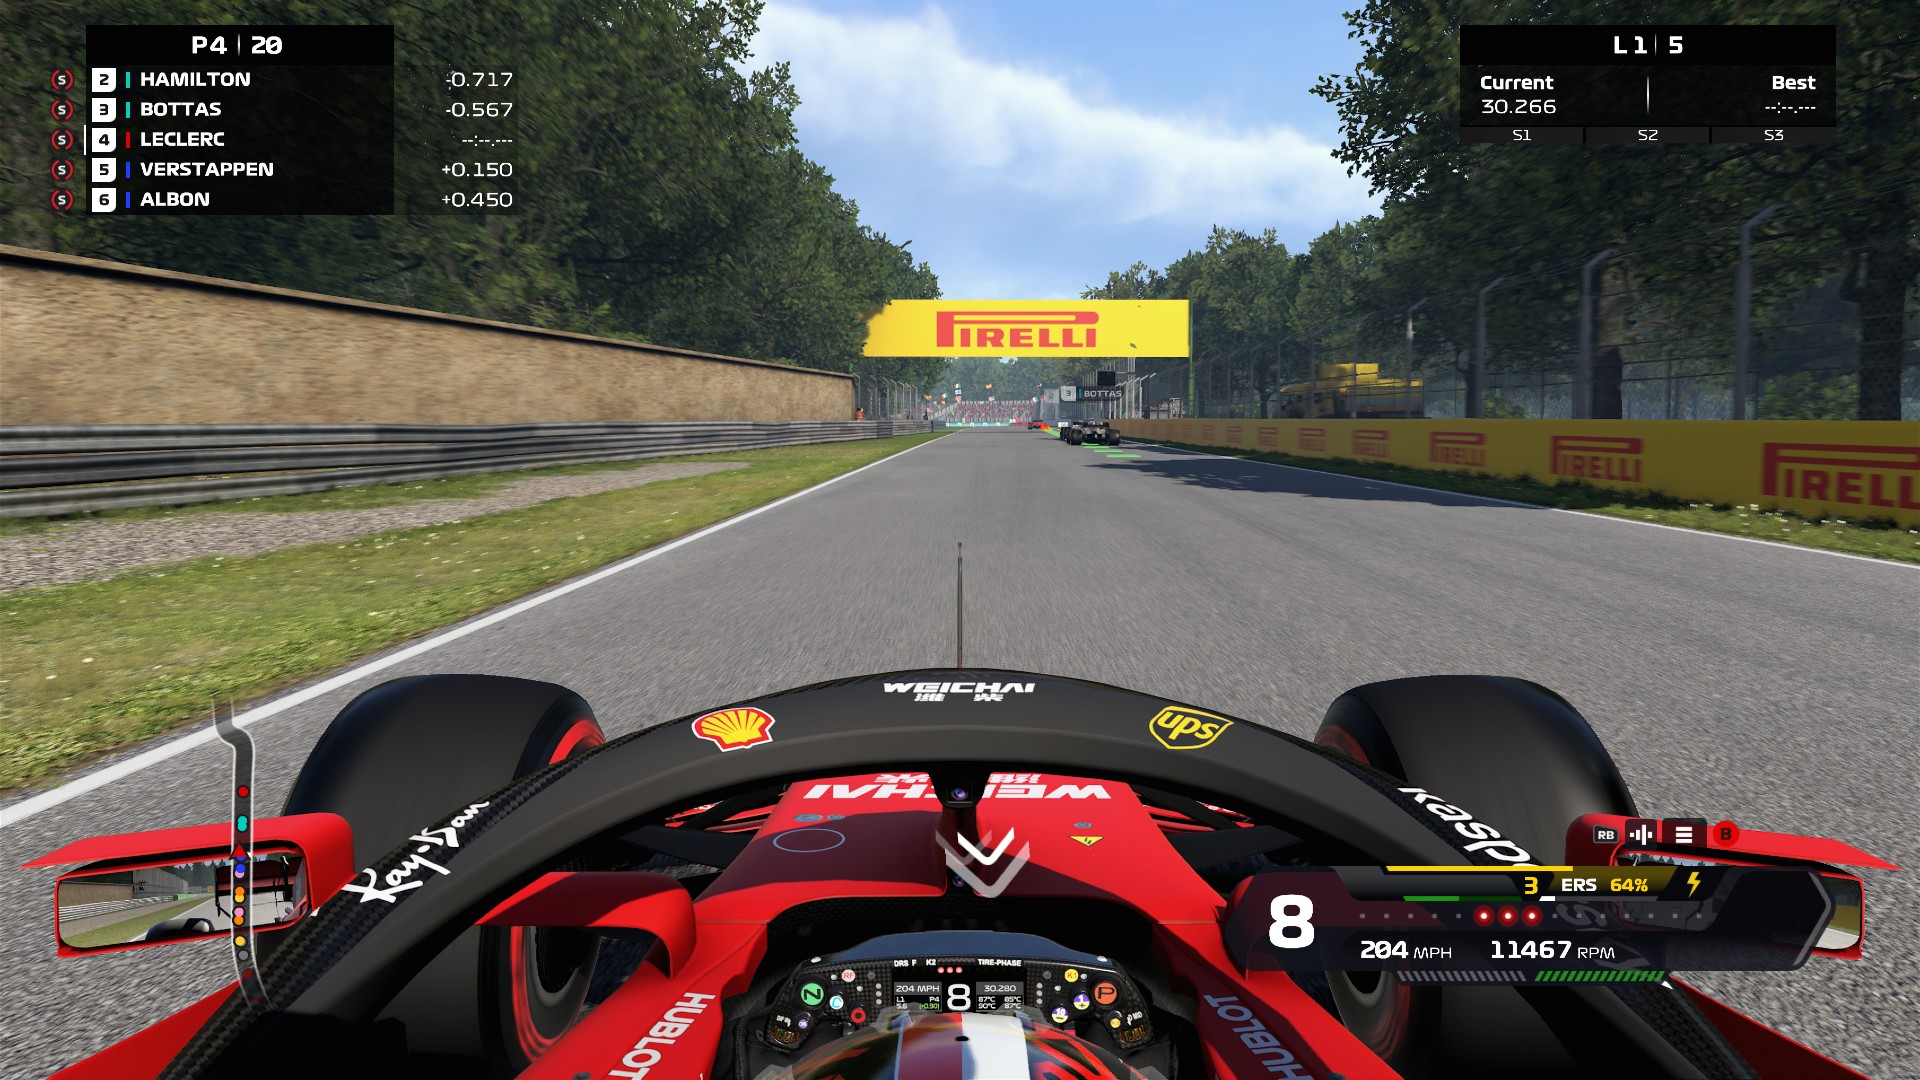 Best simulation games: F1 2020. Image shows a car driving along from the drivers' perspective.